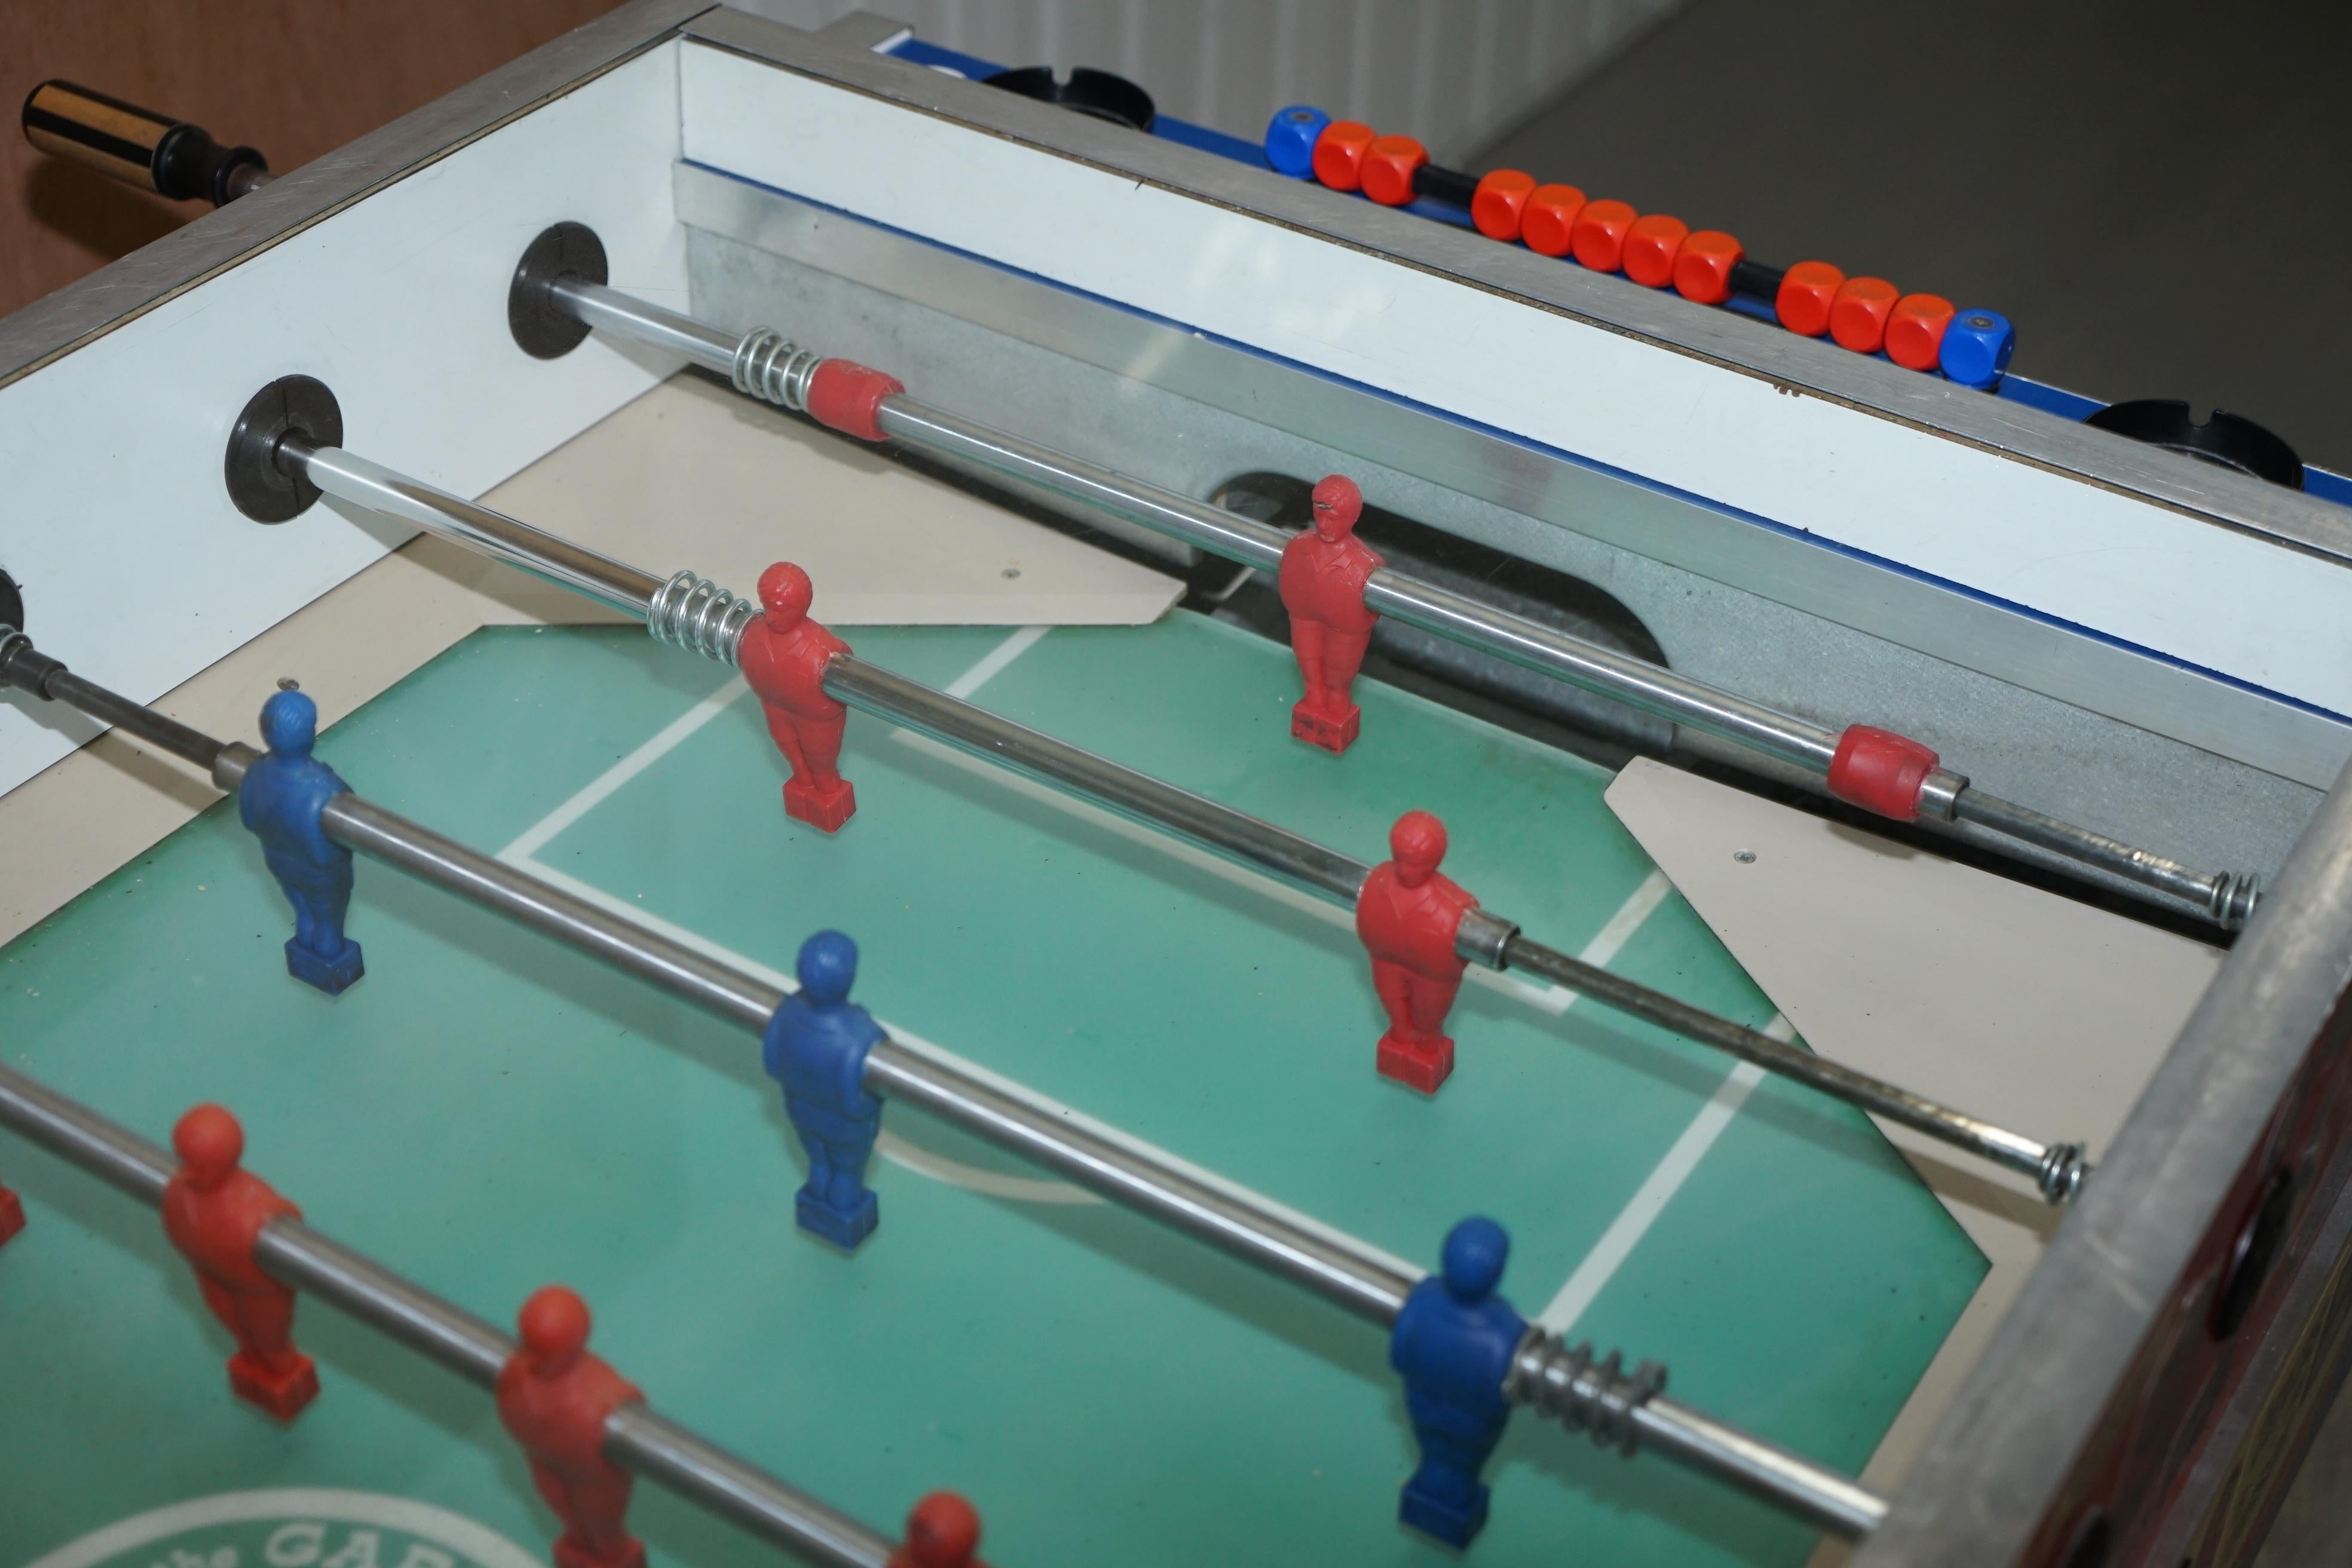 Vintage Red White & Blue Foosball Table Football Covered in Pop Culture Stickers 2